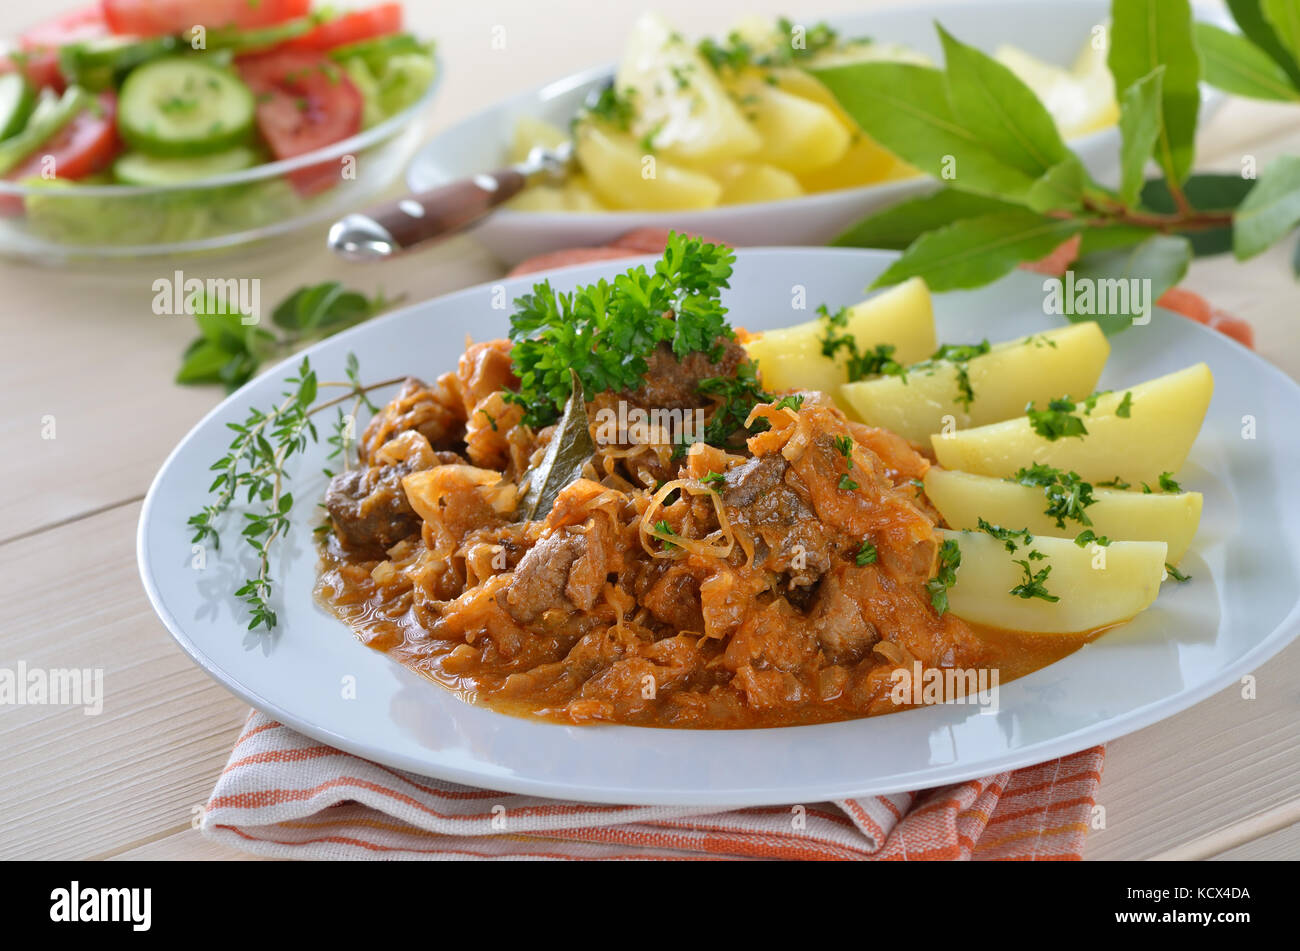 Typical Hungarian goulash (pork and beef) with pickled white cabbage (sauerkraut) and boiled potatoes Stock Photo